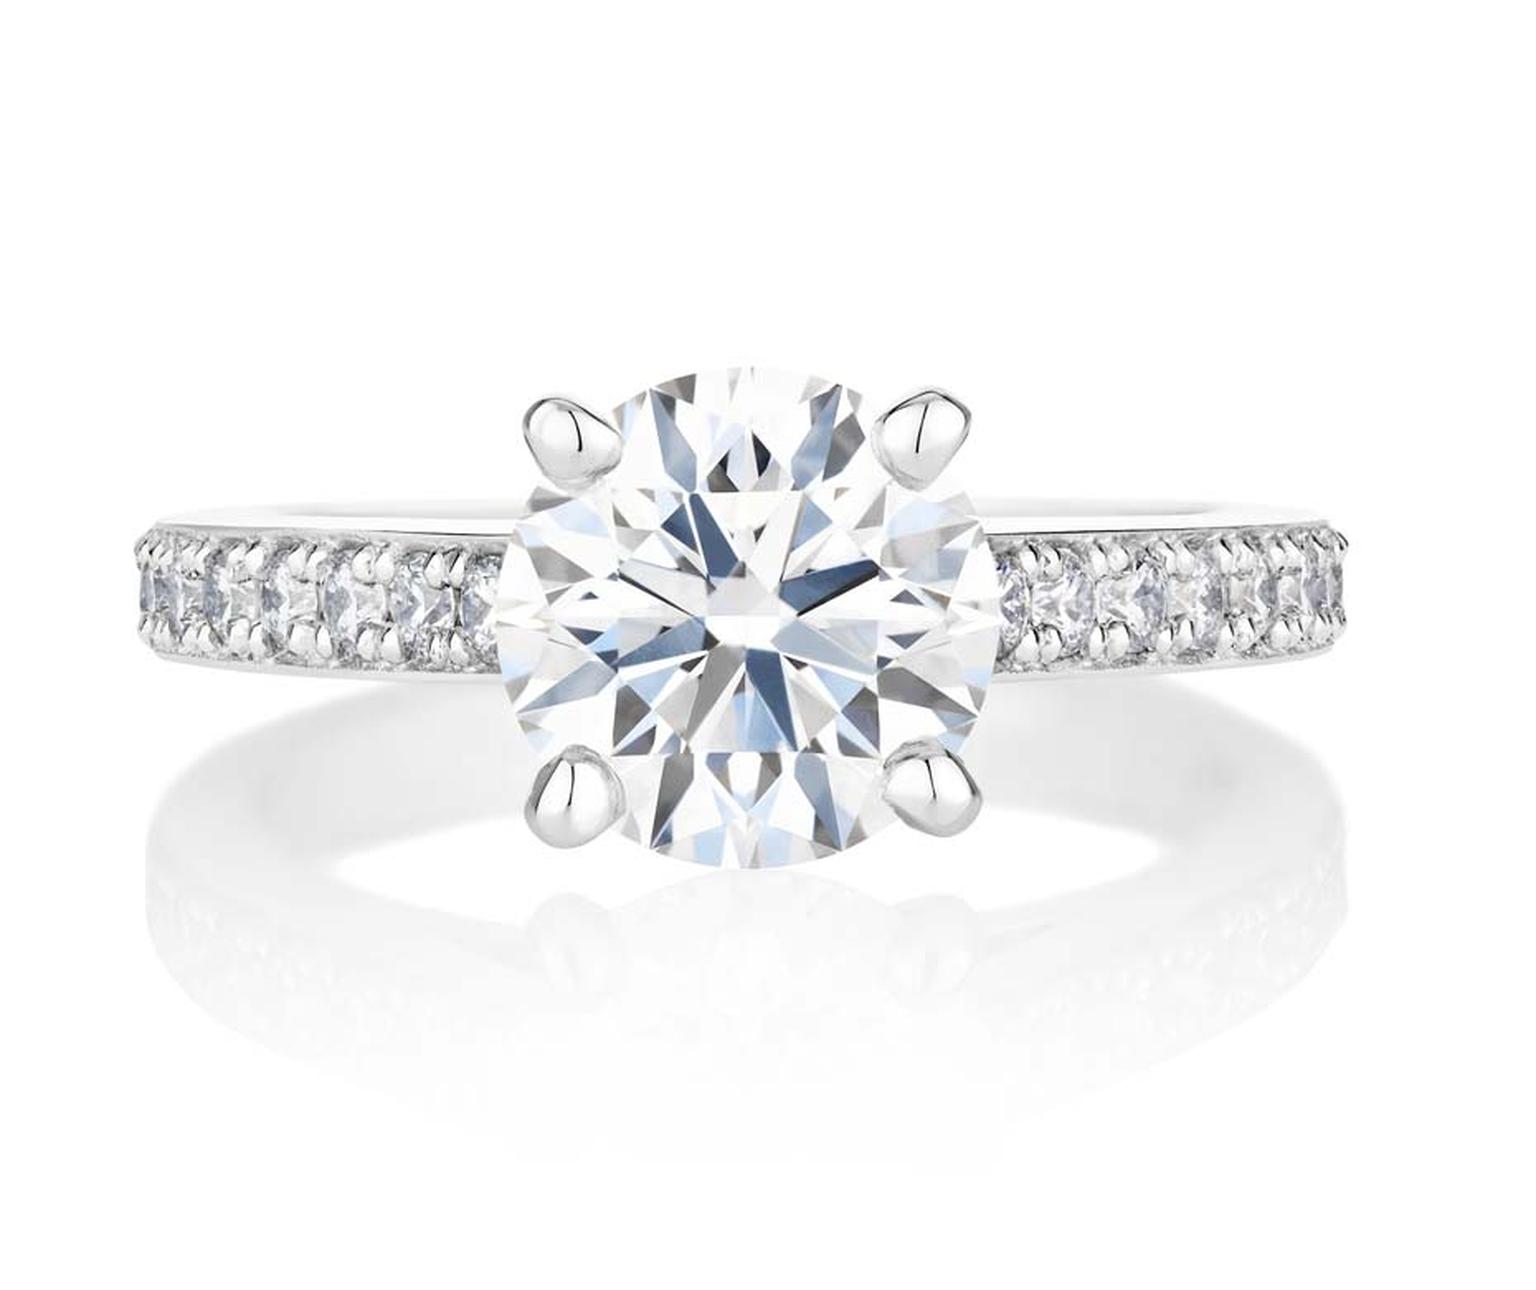 The latest design to join the collection of De Beers engagement rings, called Old Bond Street, is inspired by the classic lines of the jewellery house's very first diamond solitaire.